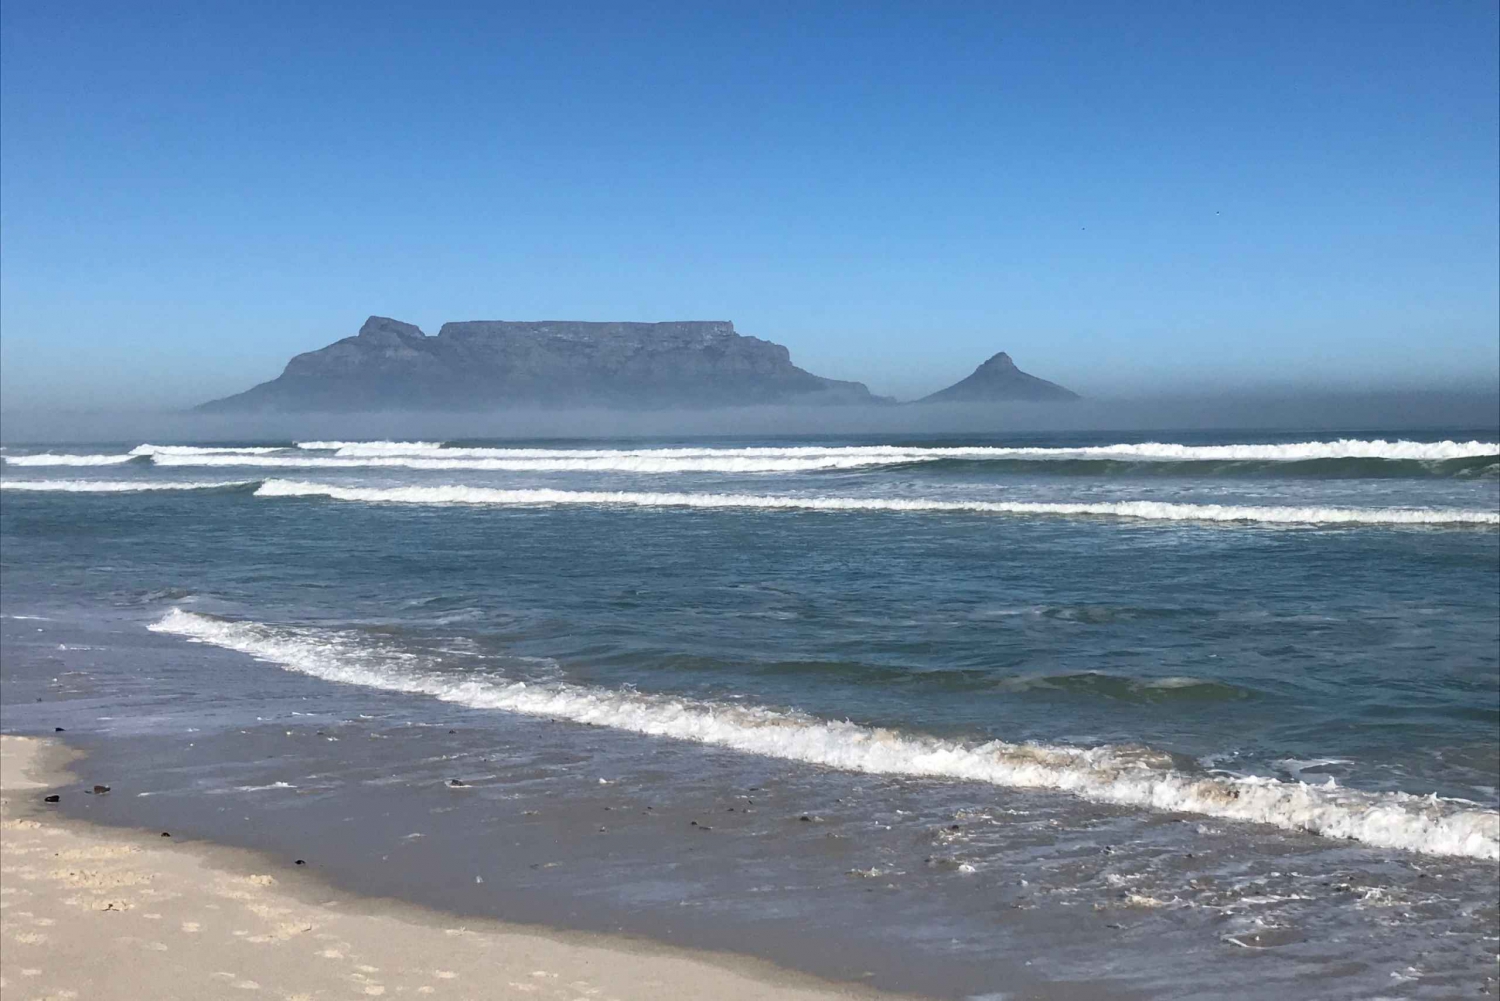 Cape Town: Some Attractions of the Cape (private tour)